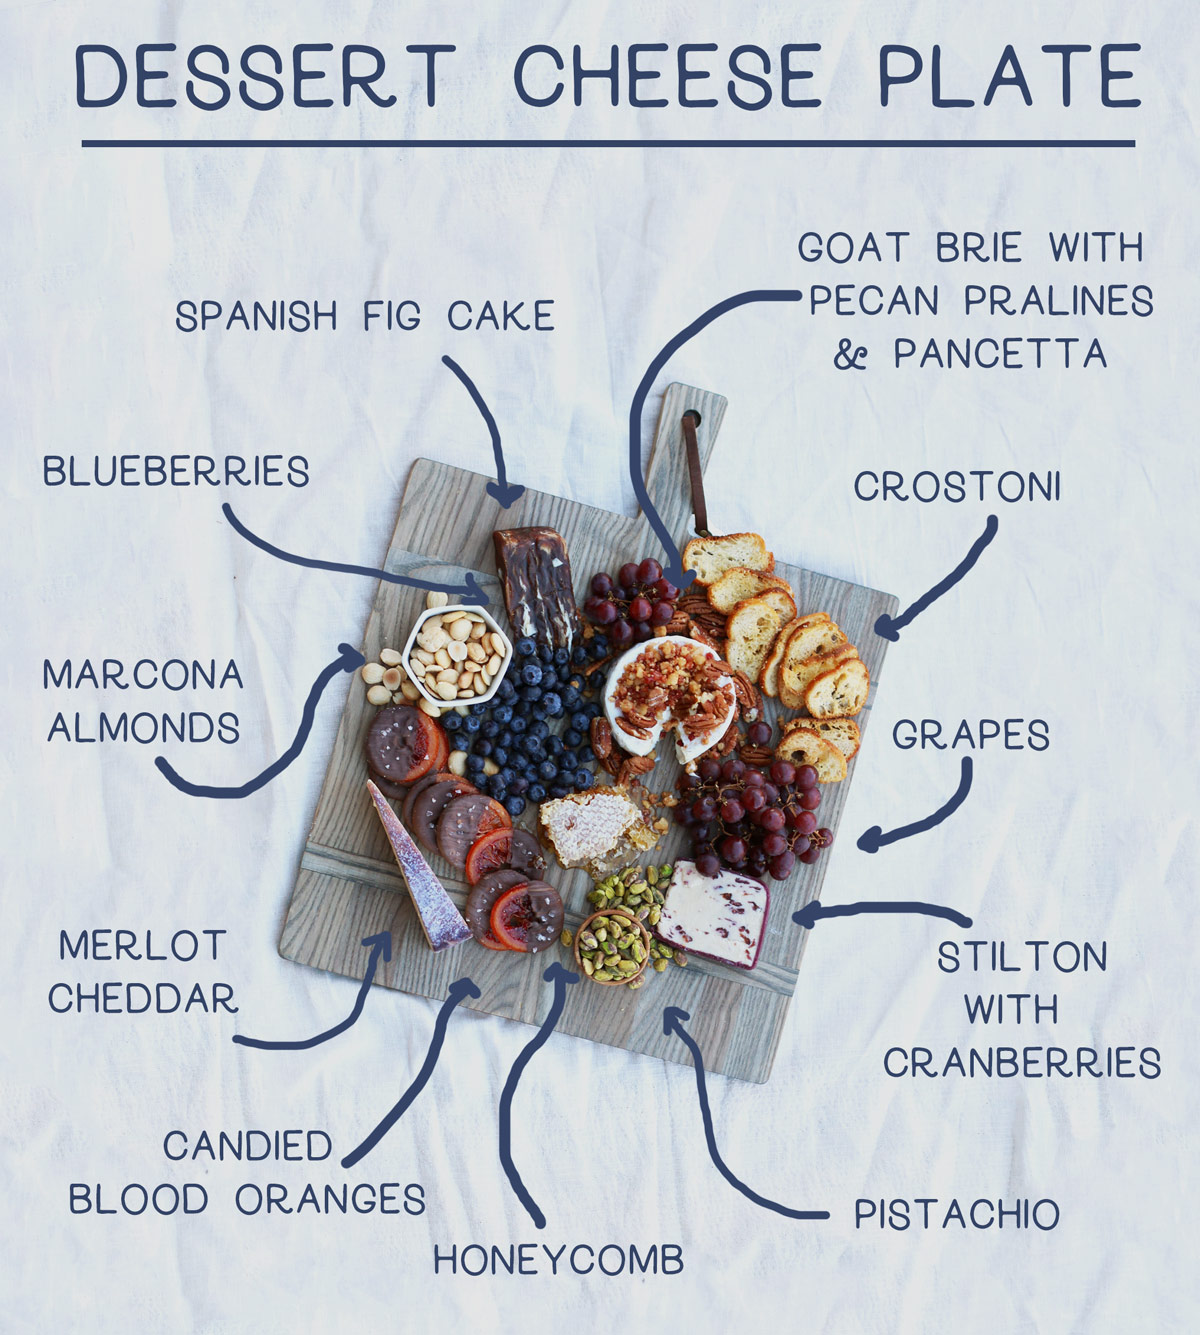 Dessert Cheese Plate Infographic How-To